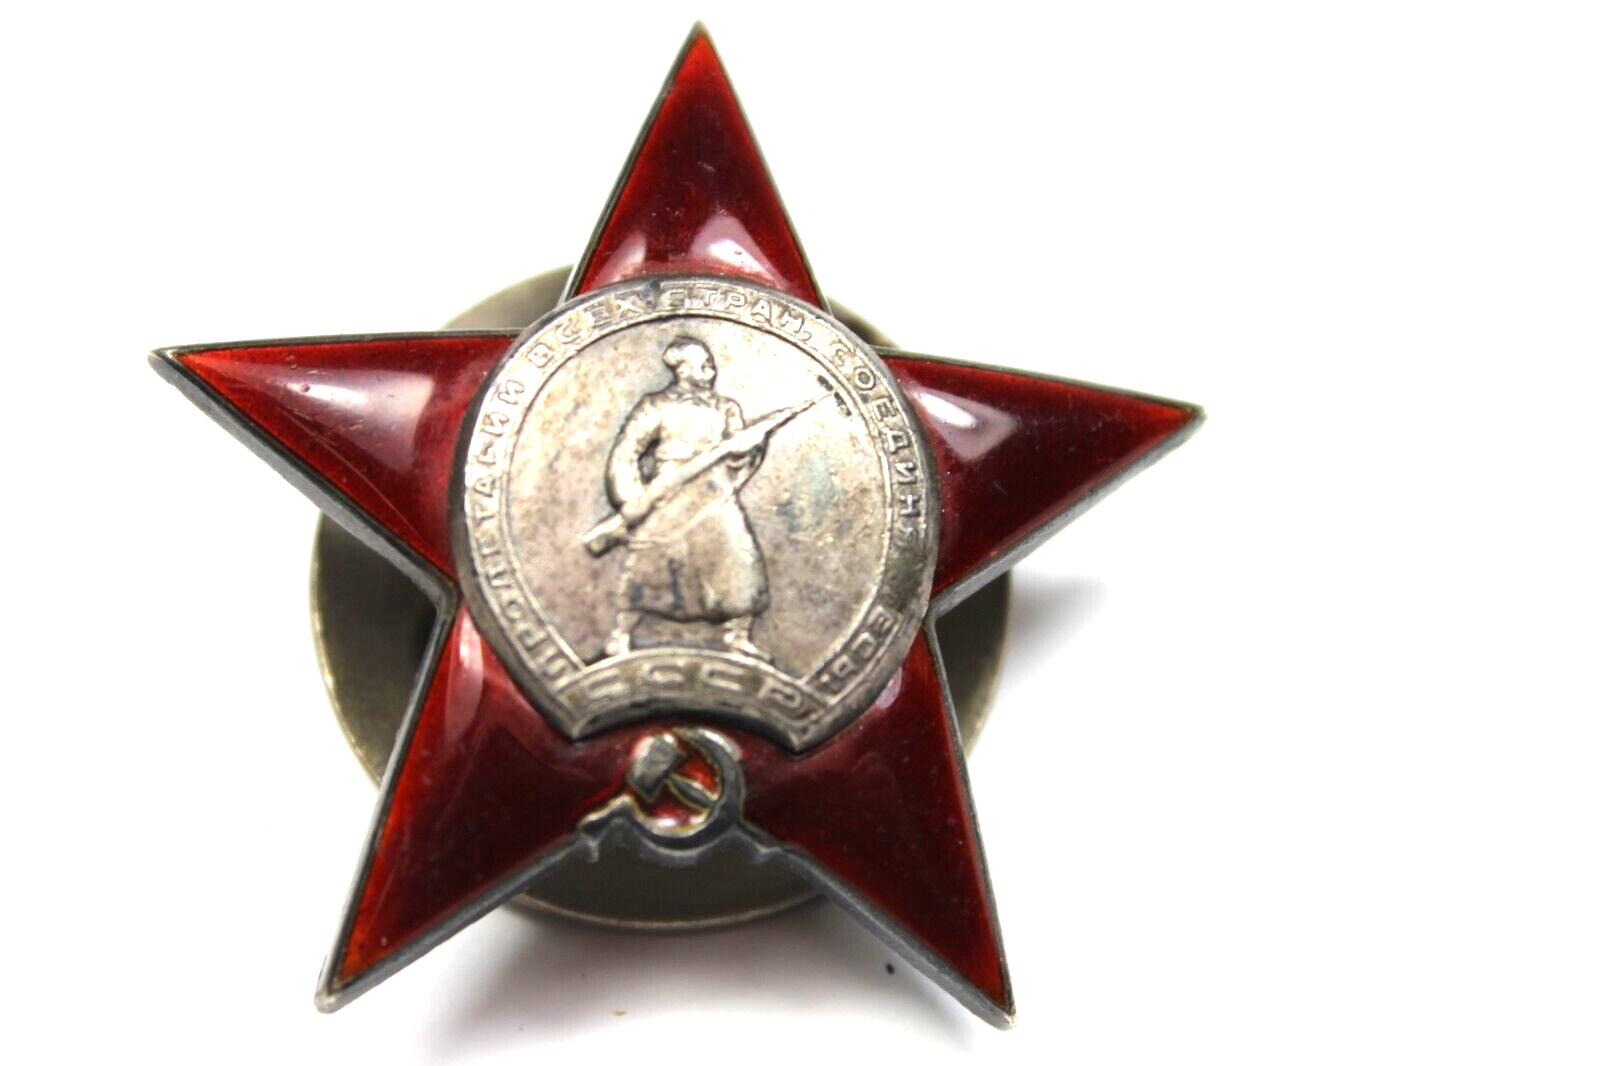 SOVIET RUSSIAN RUSSIA ORDER RED STAR MILITARY AWARD STERLING SILVER MEDAL BADGE